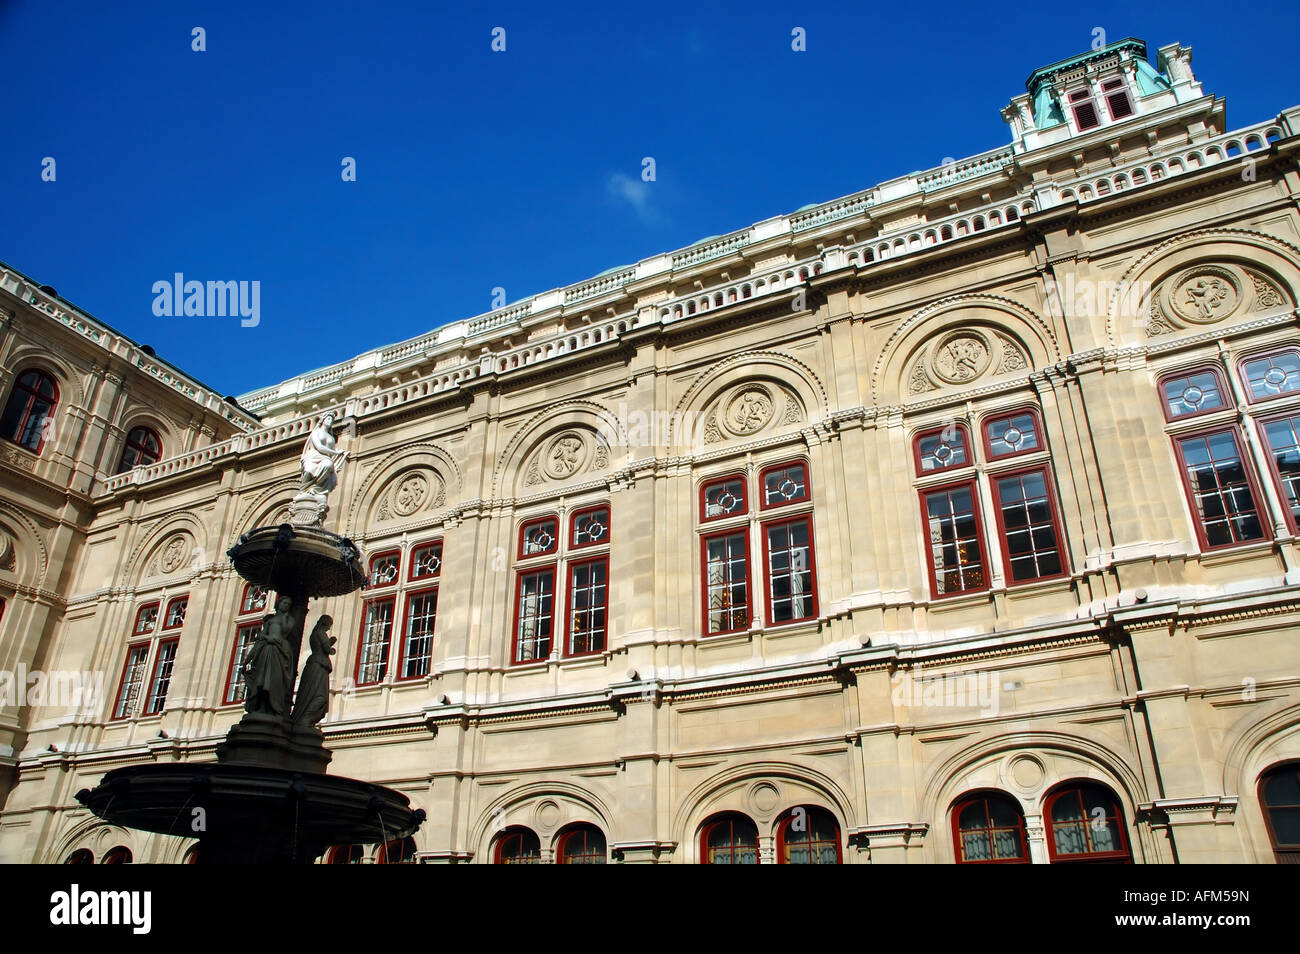 Fountain and side view of the magnificent Opera House Staatsoper in central Vienna Austria Stock Photo